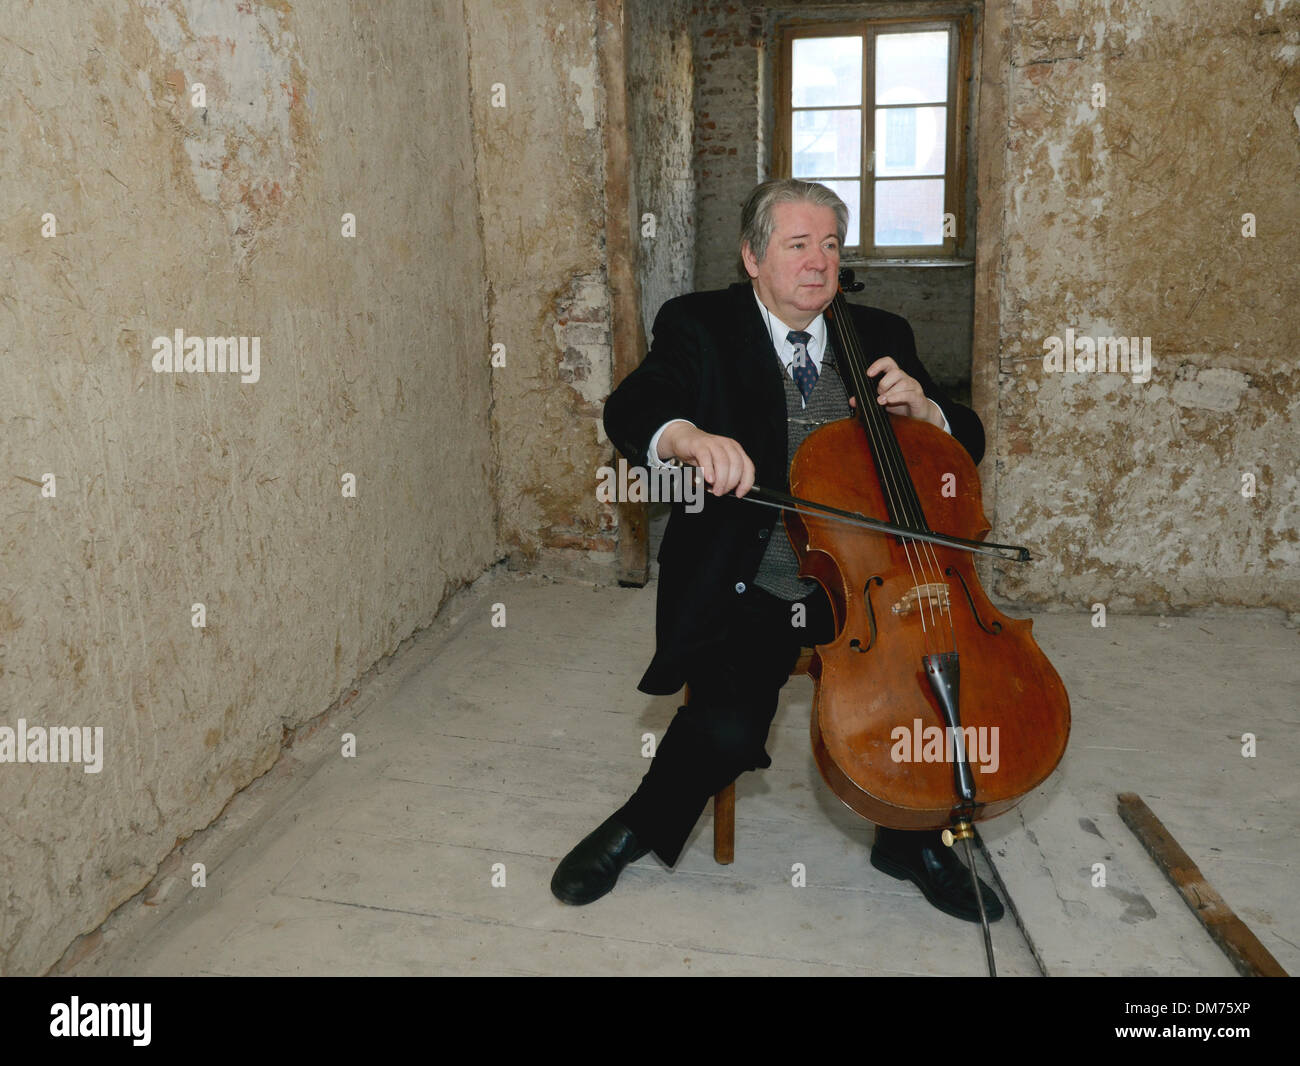 dpa-Exclusive - Cellist Thomas Beckmann plays on his cello as he sits Stock  Photo - Alamy